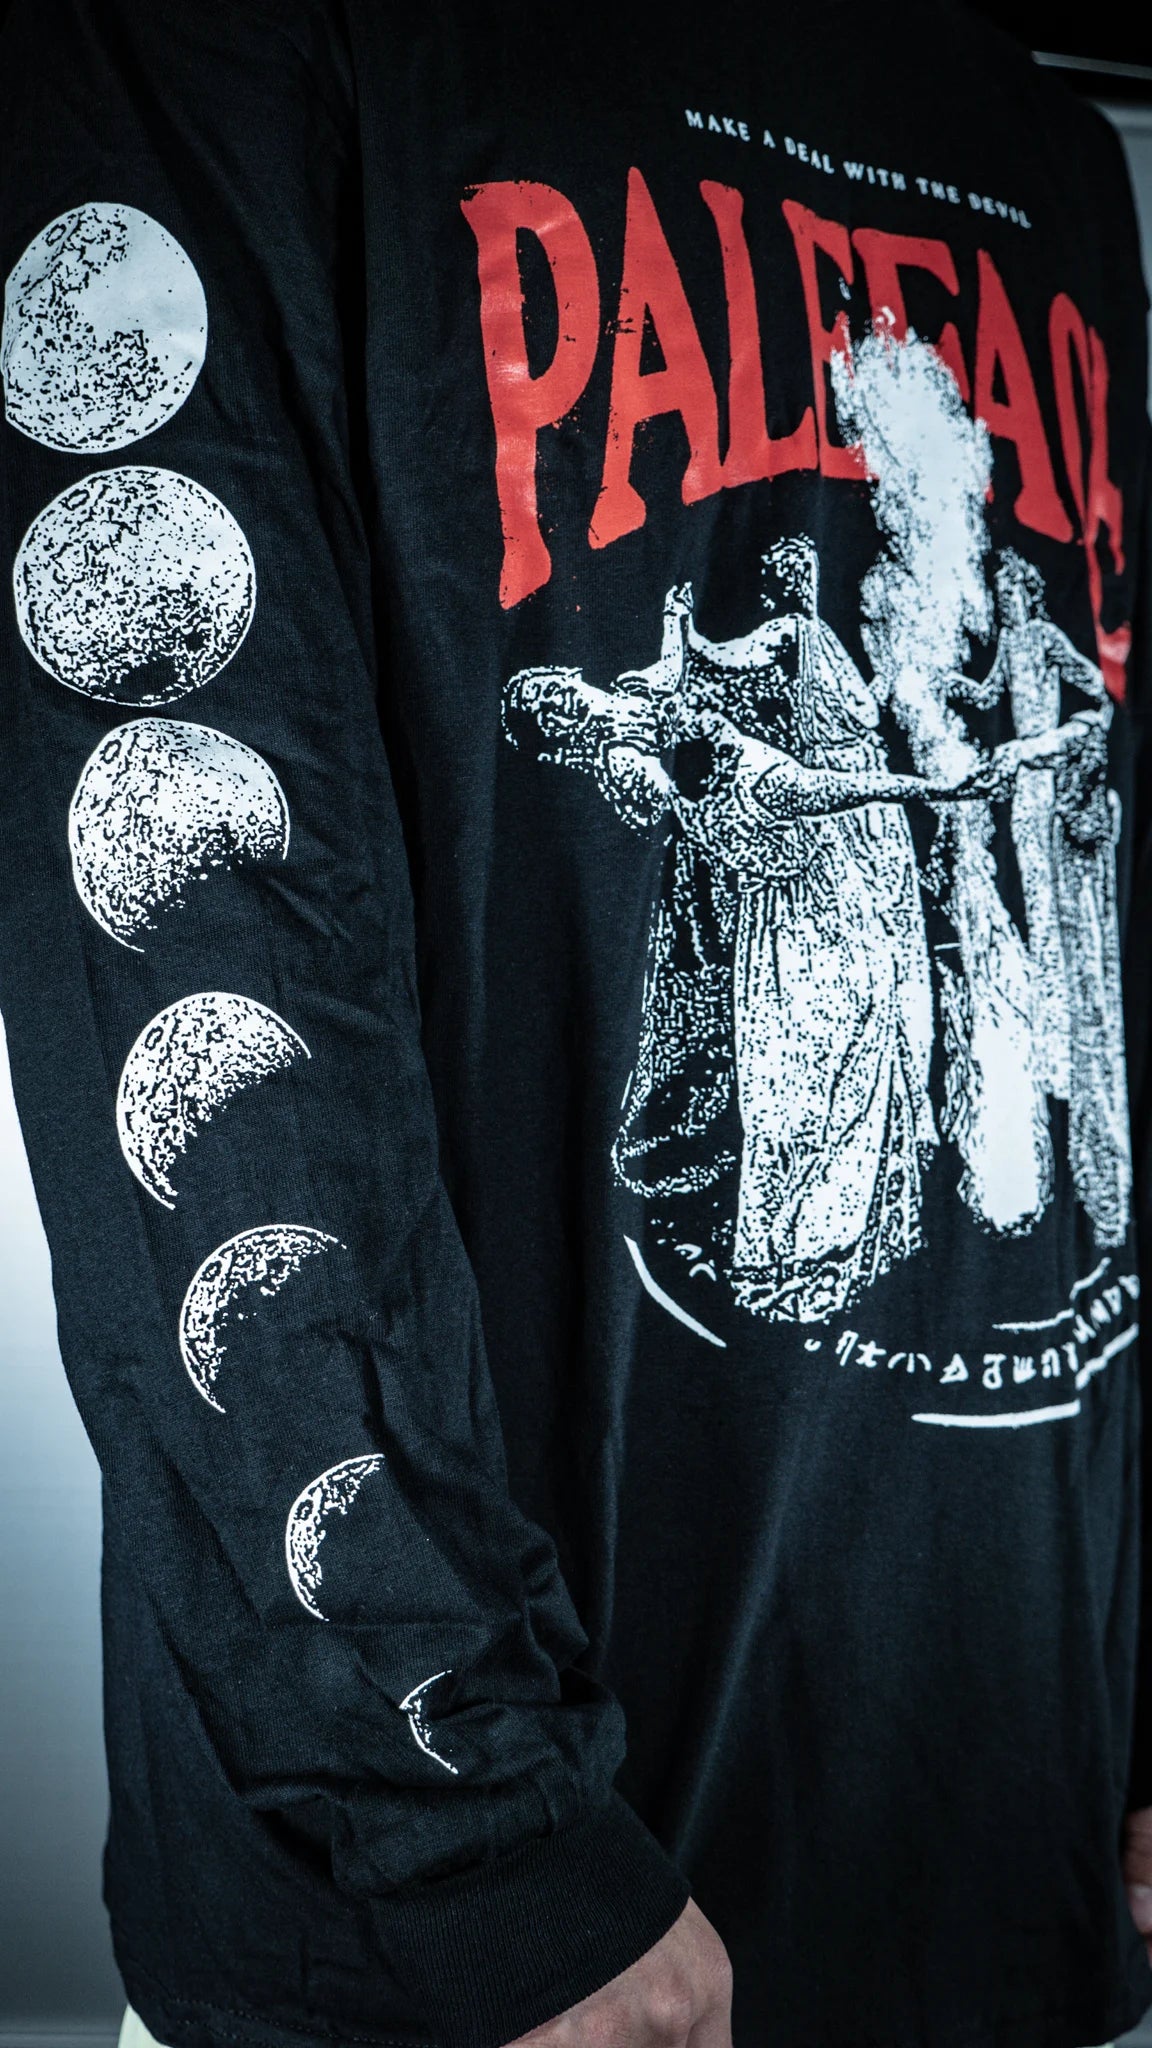 MAKE A DEAL WITH THE DEVIL LONGSLEEVE